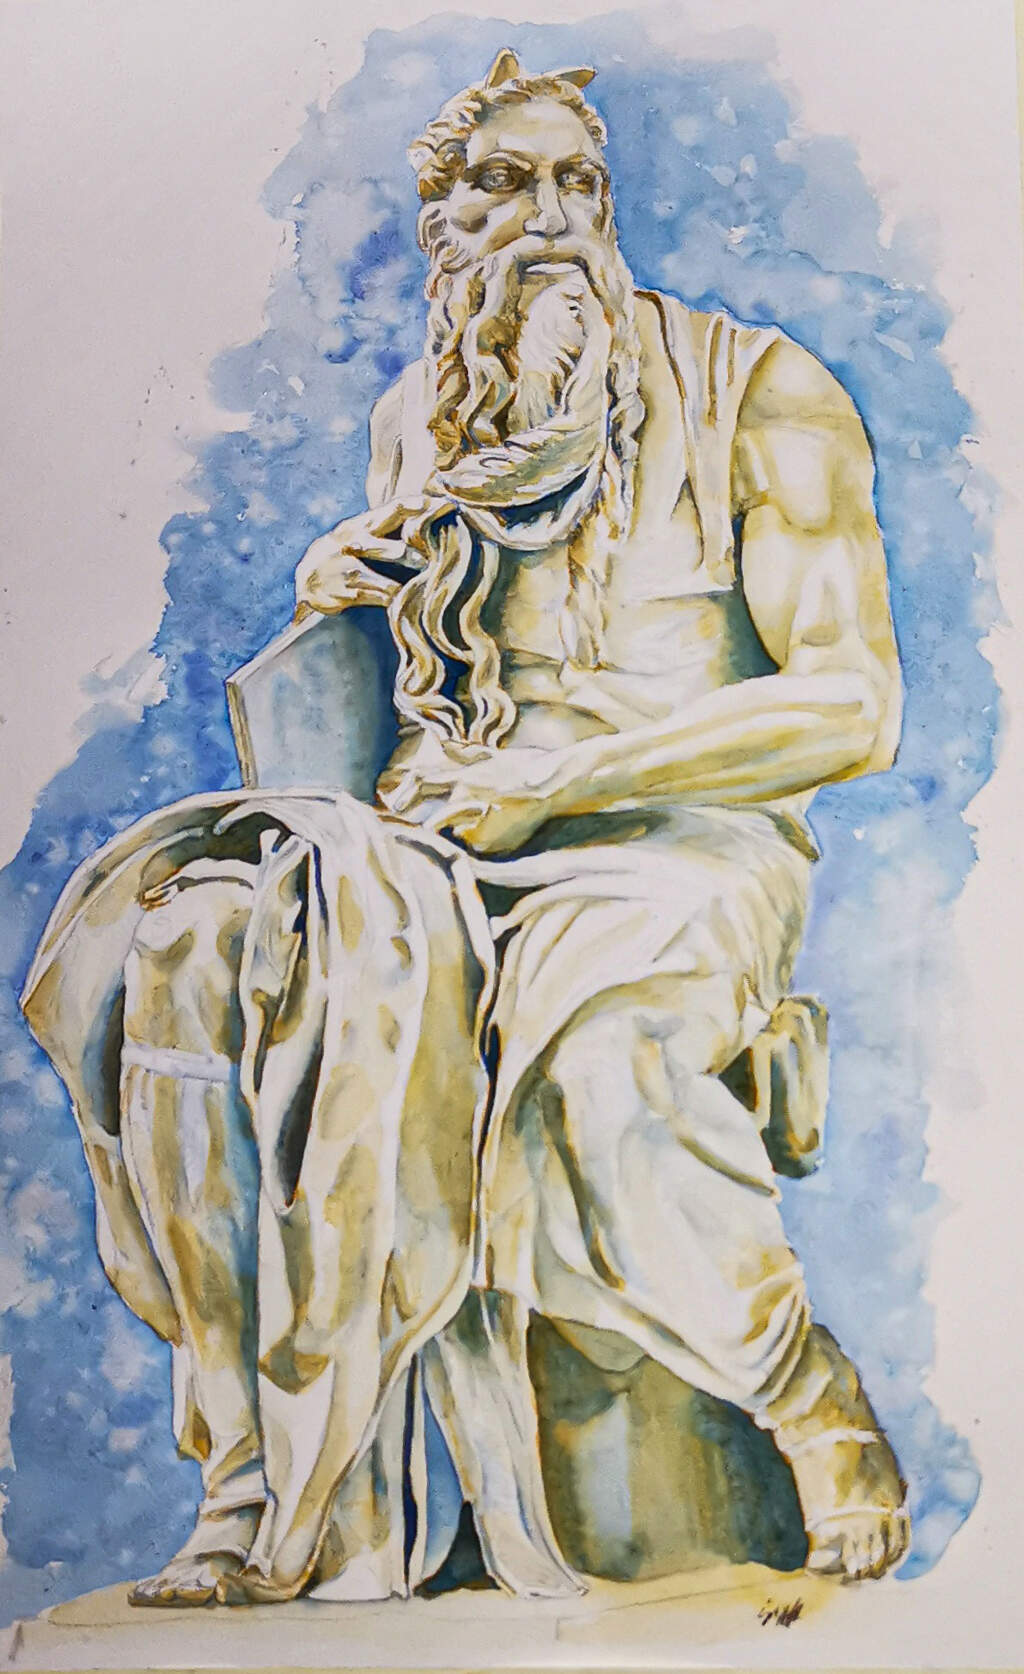 waterpaint of the famous sculpture by Michelangelo